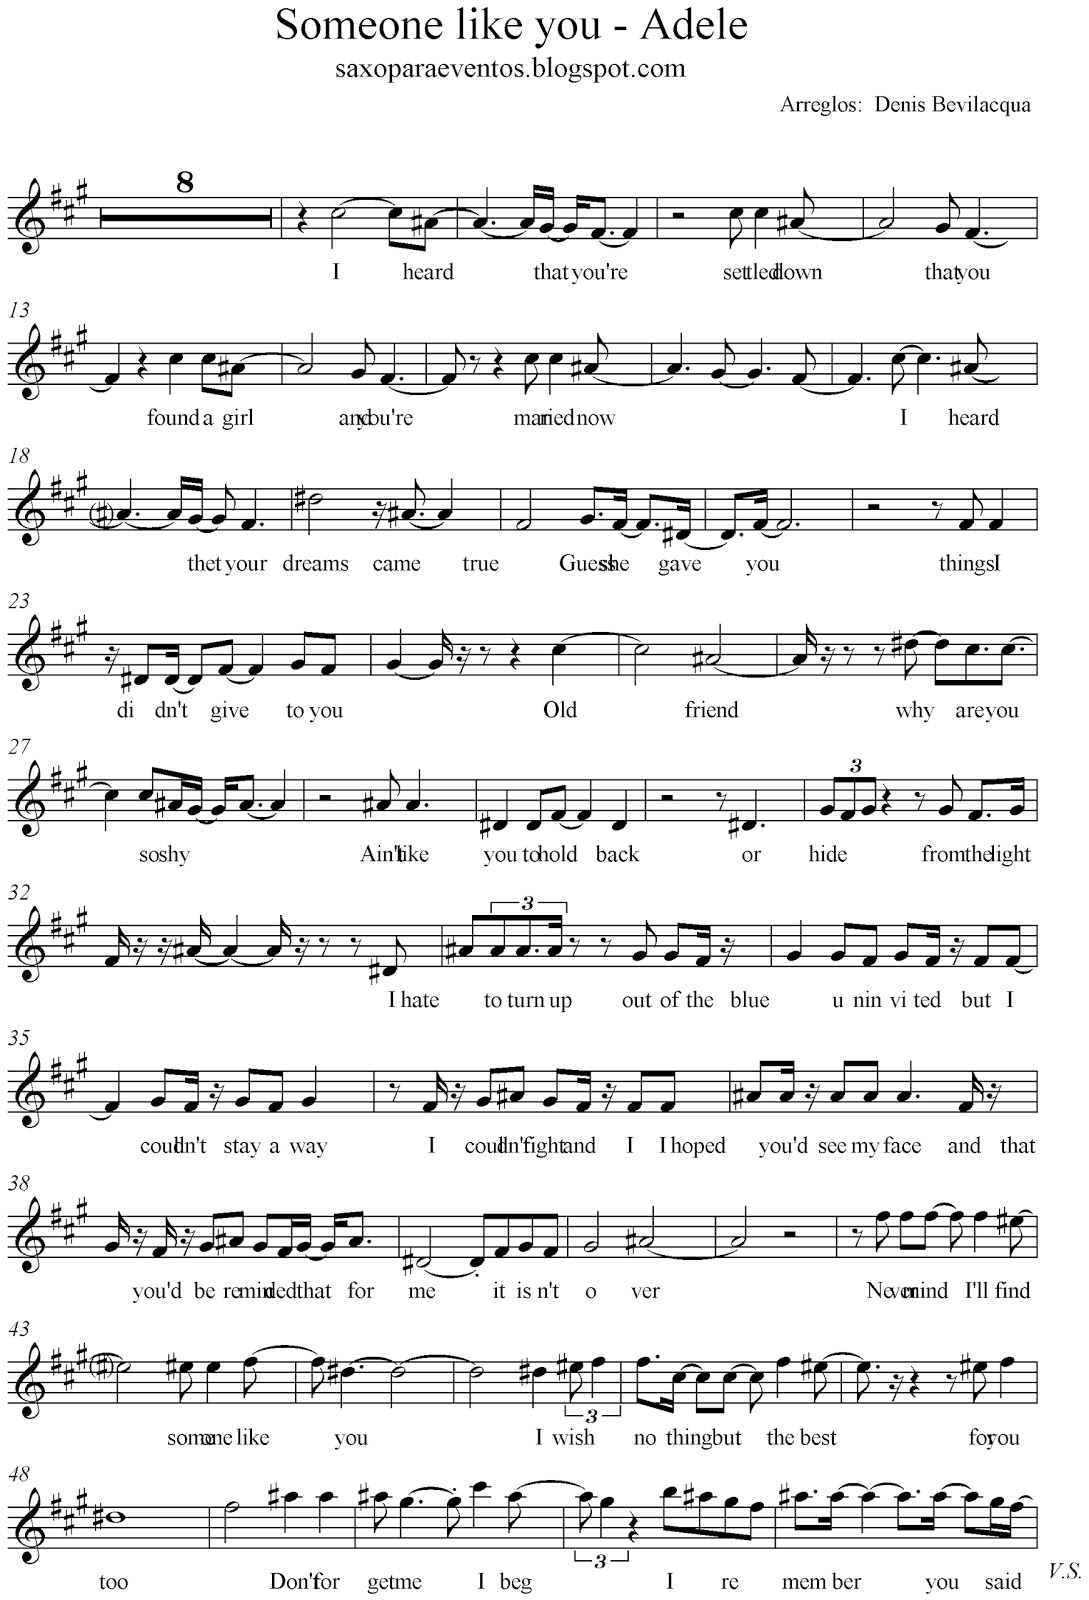 adele someone like you piano sheet music free with notes1089 x 1600